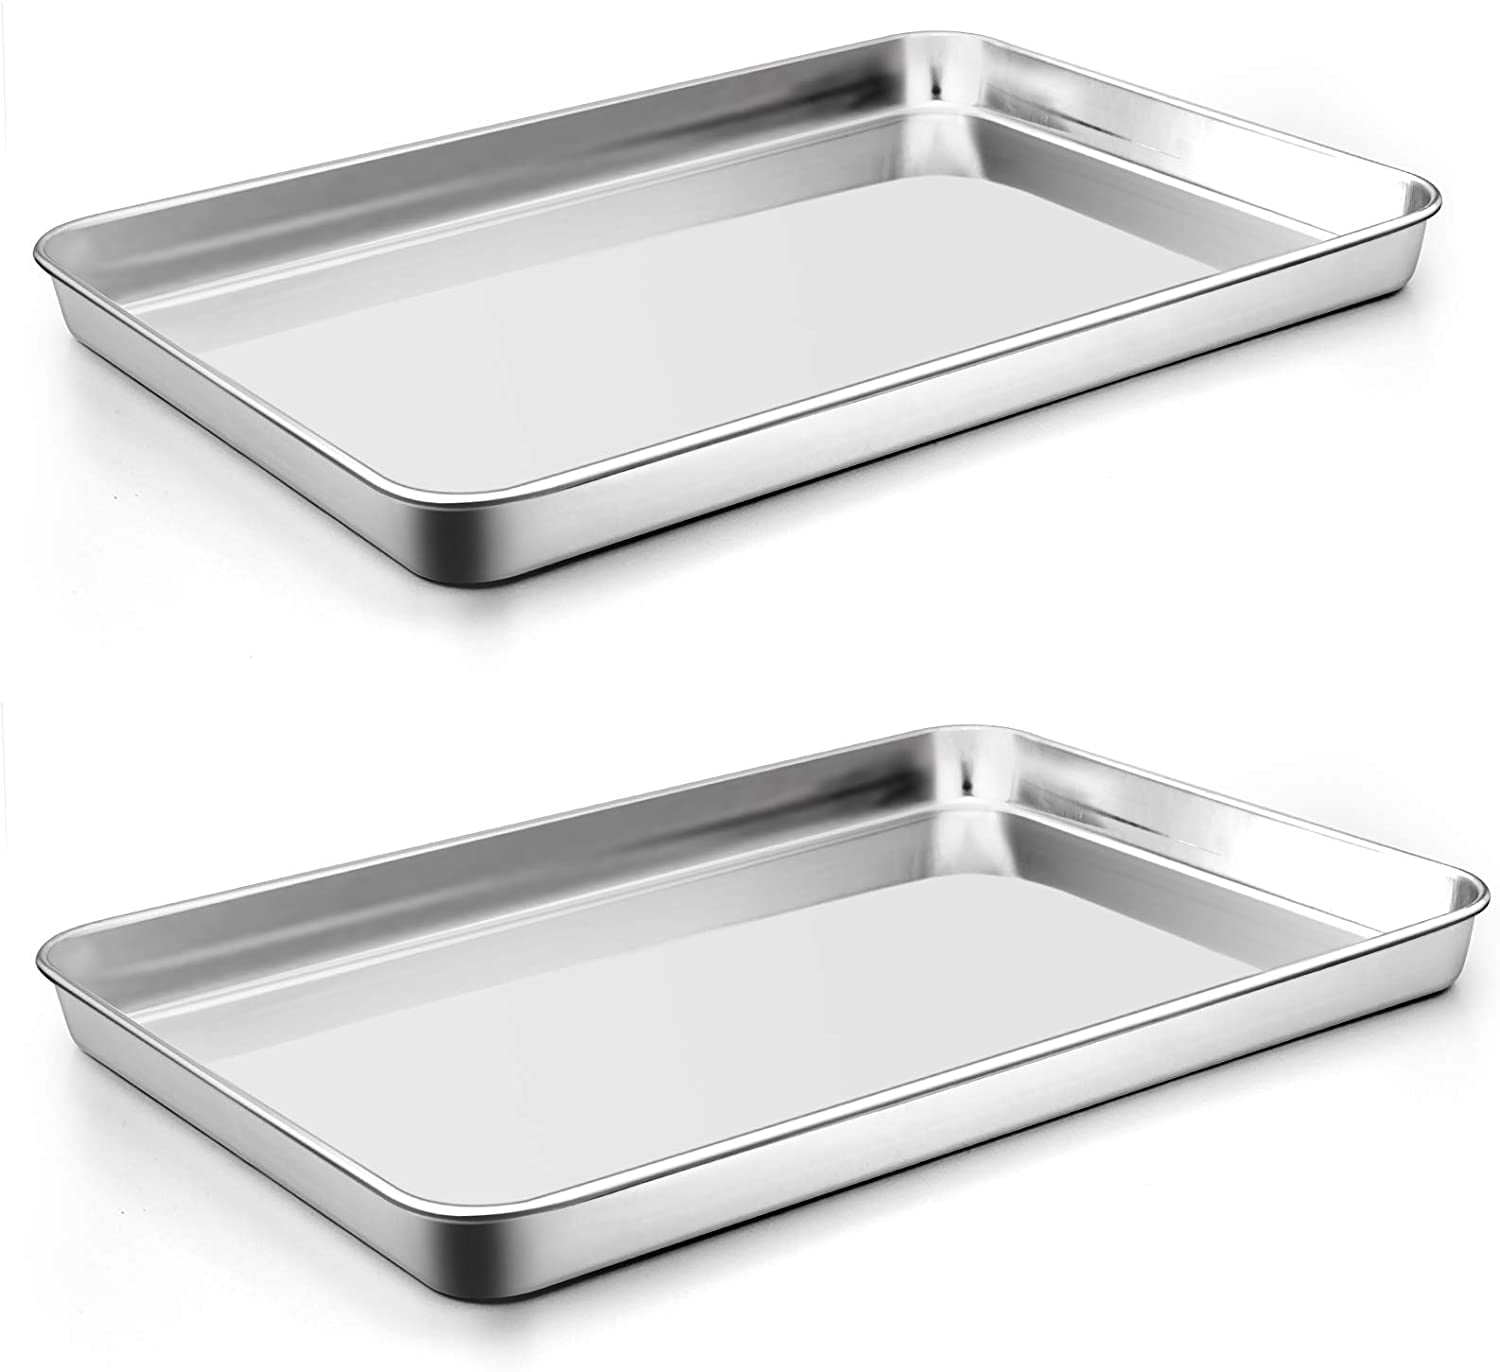 Stainless Steel Baking Pan 1X Large Cookie Sheet Set For Toaster Oven-Tray 